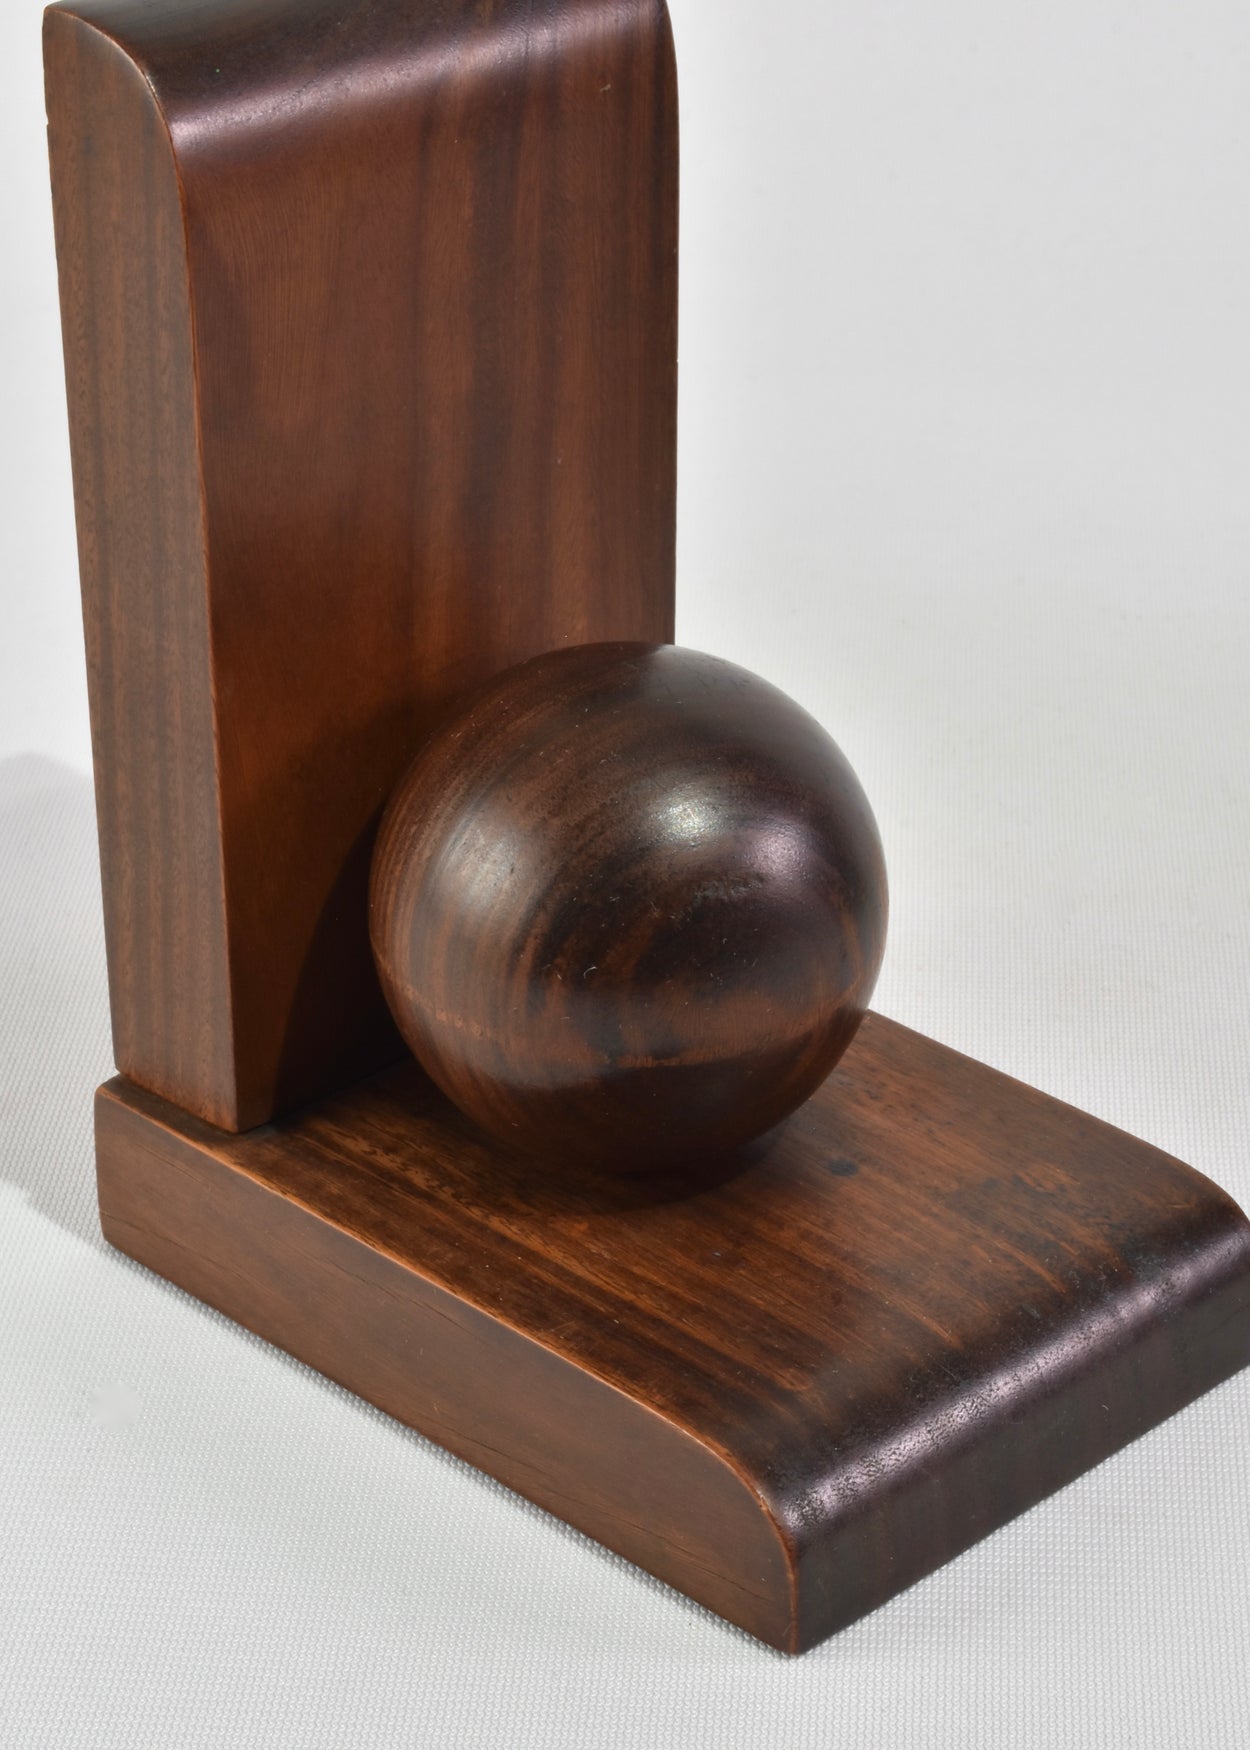 Wooden Sphere Bookends